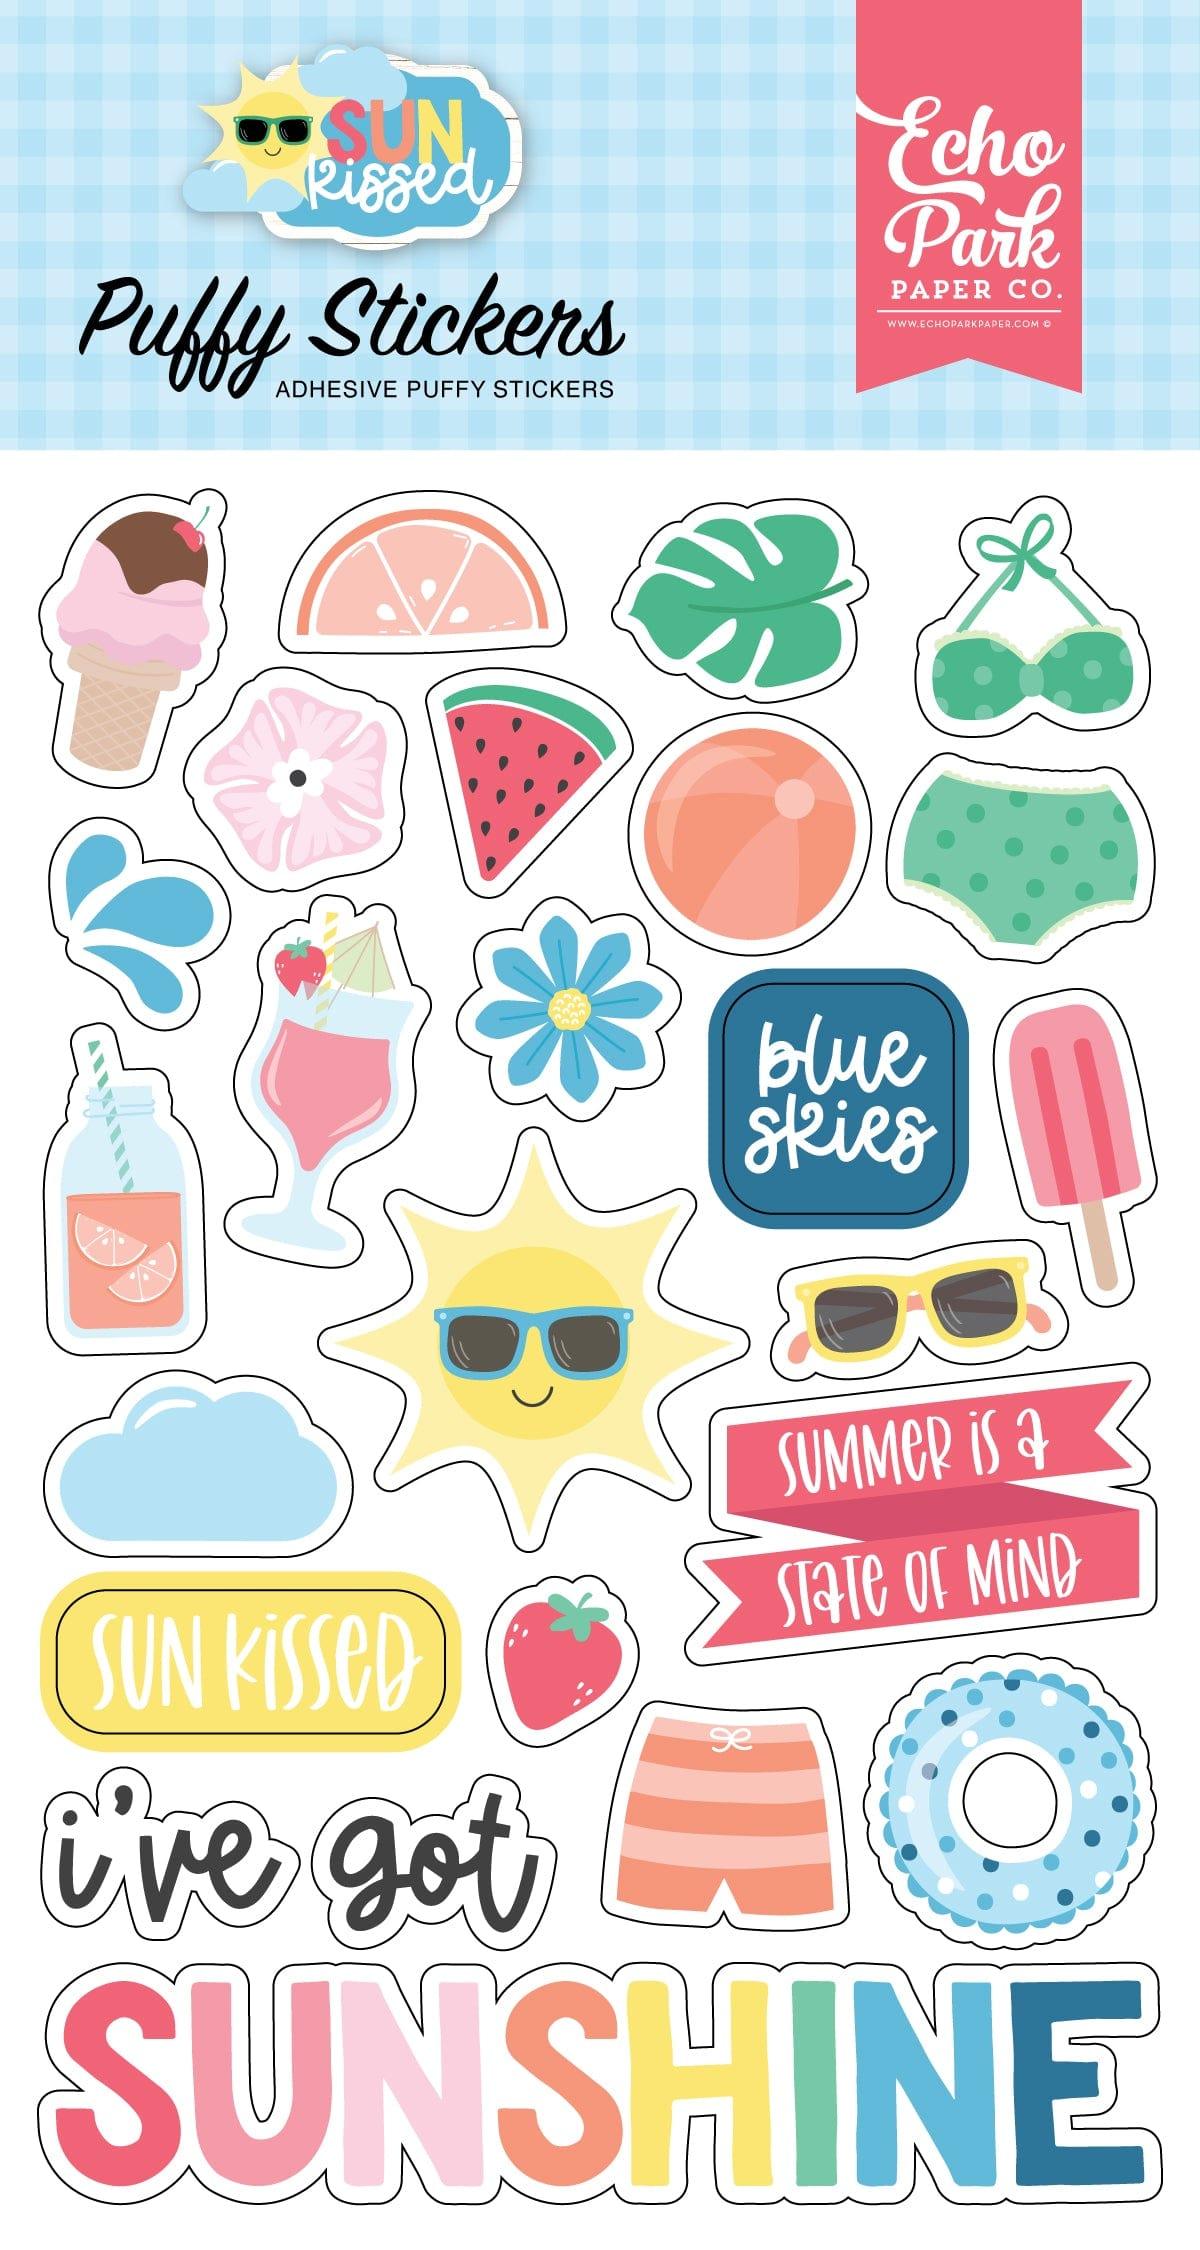 Sun Kissed Collection 4 x 6 Puffy Scrapbook Stickers by Echo Park Paper